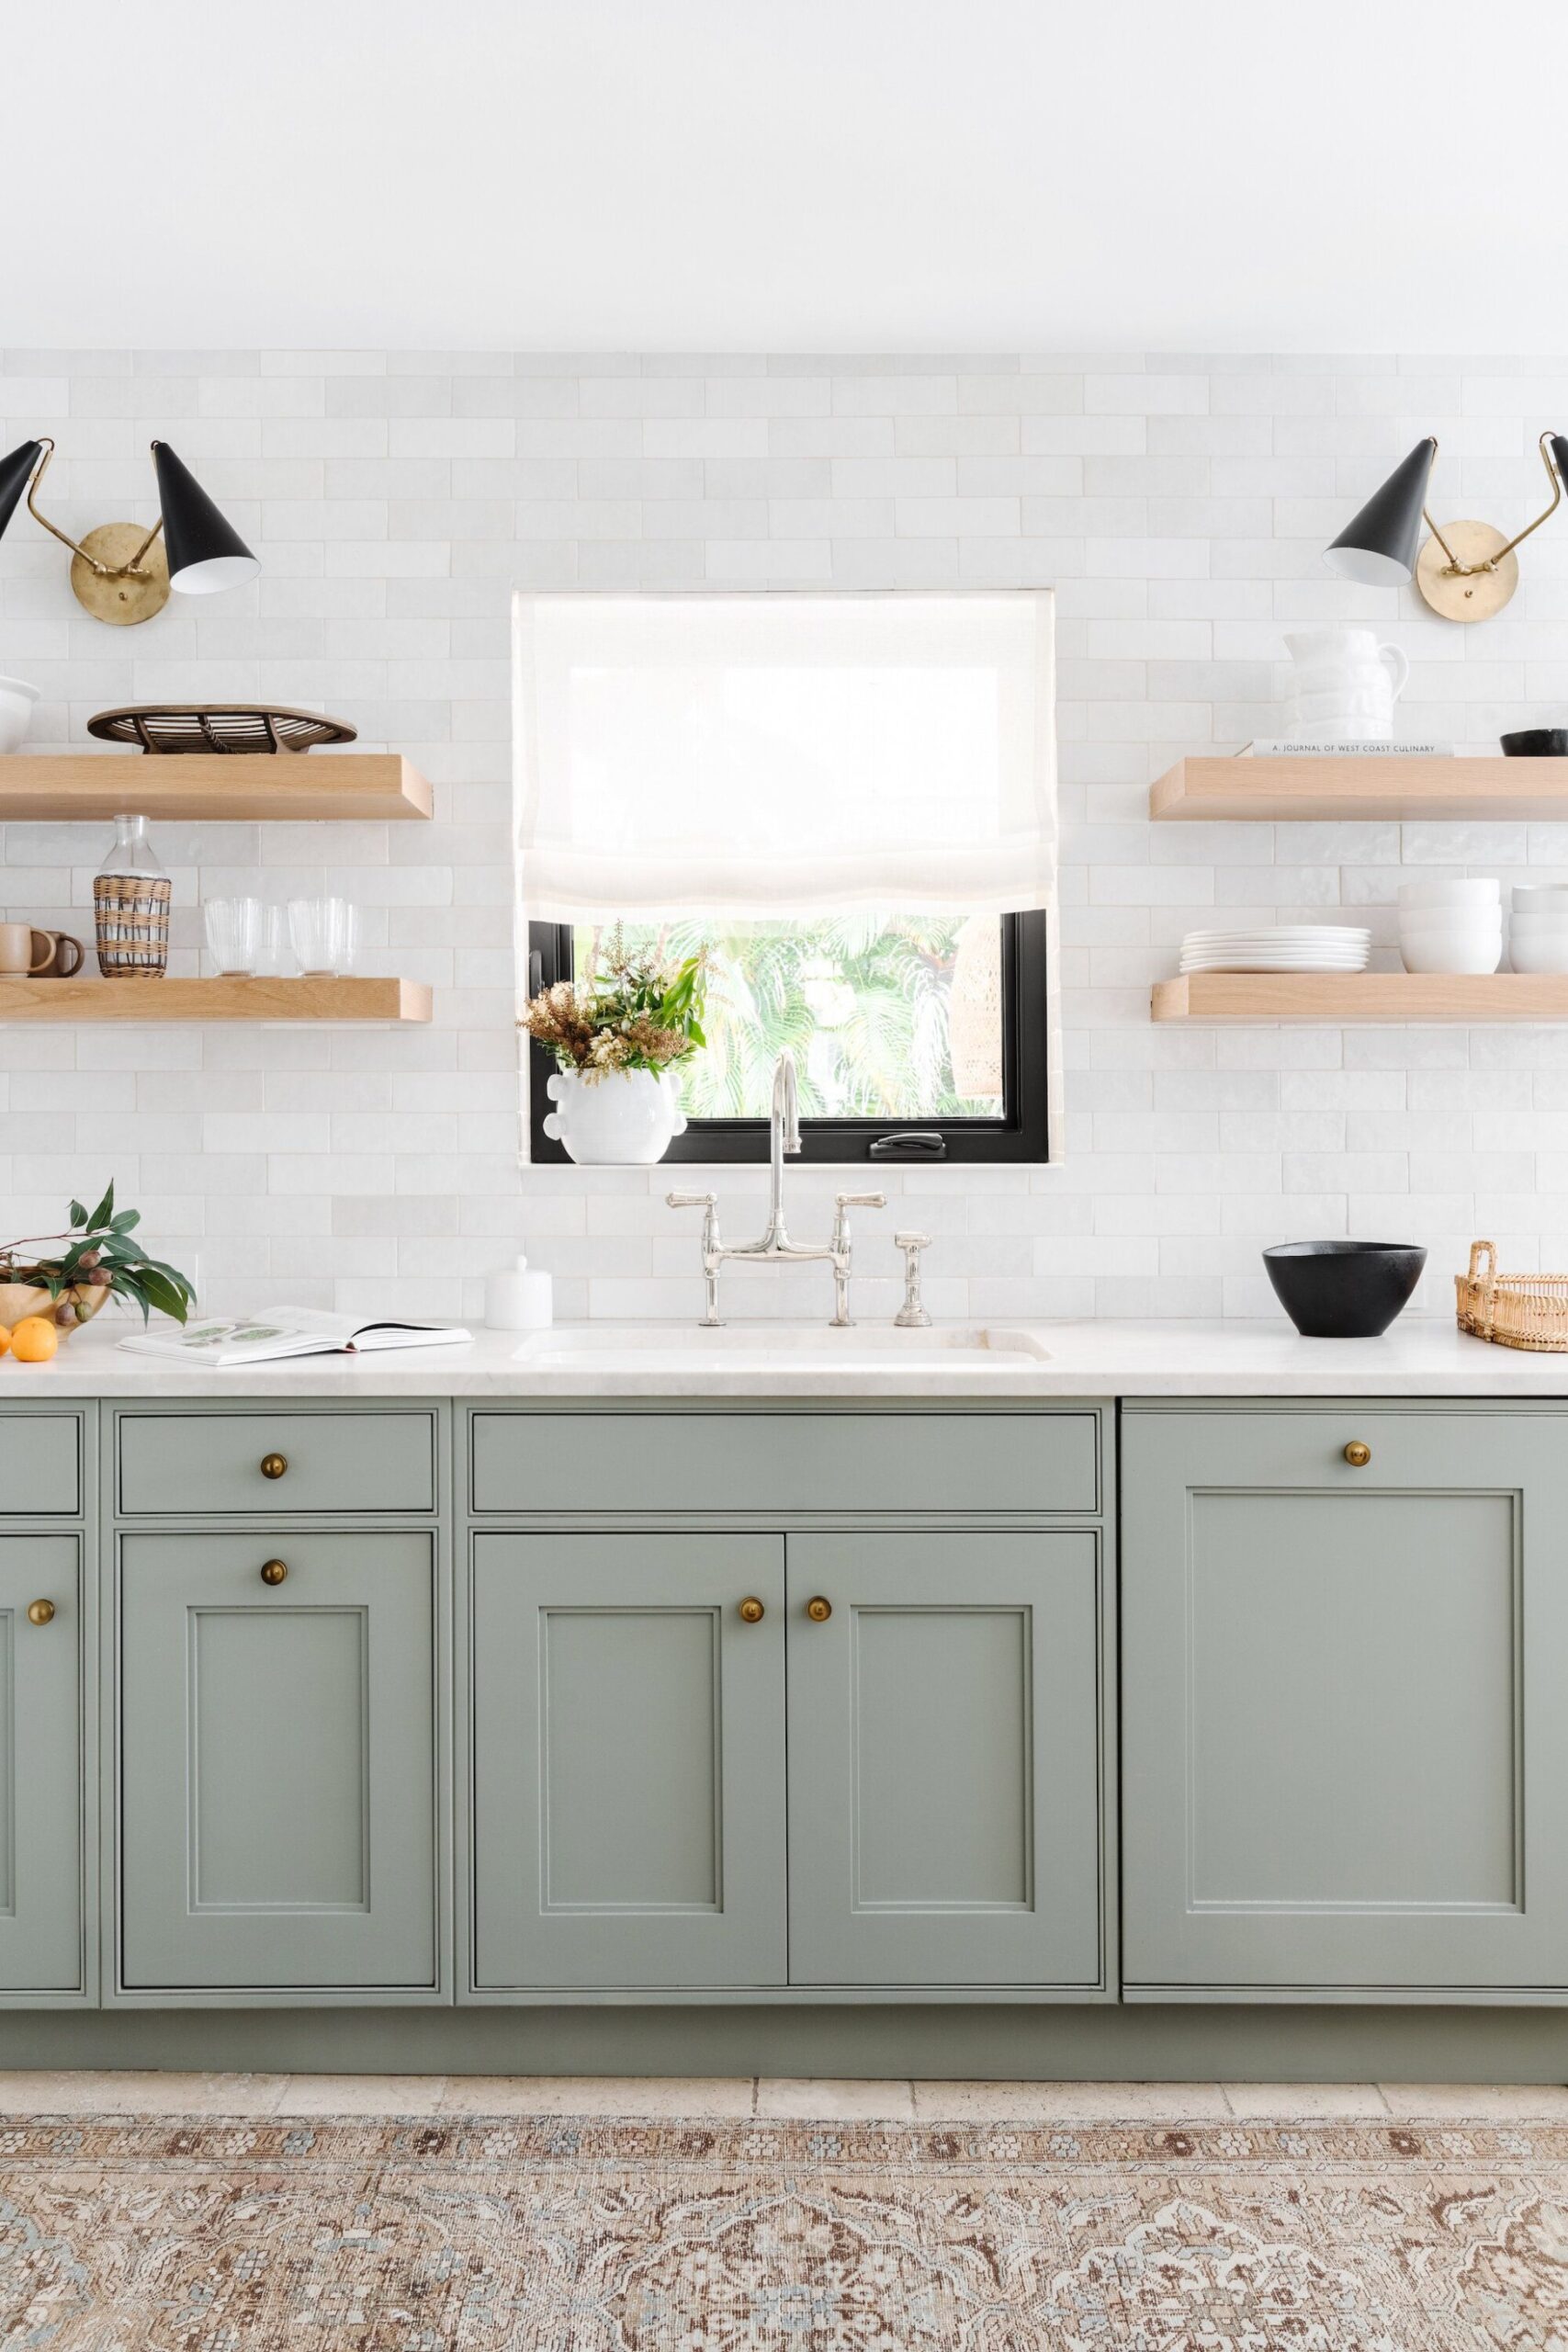 How to Organize Kitchen Cabinets, According to Experts - counter cabinets